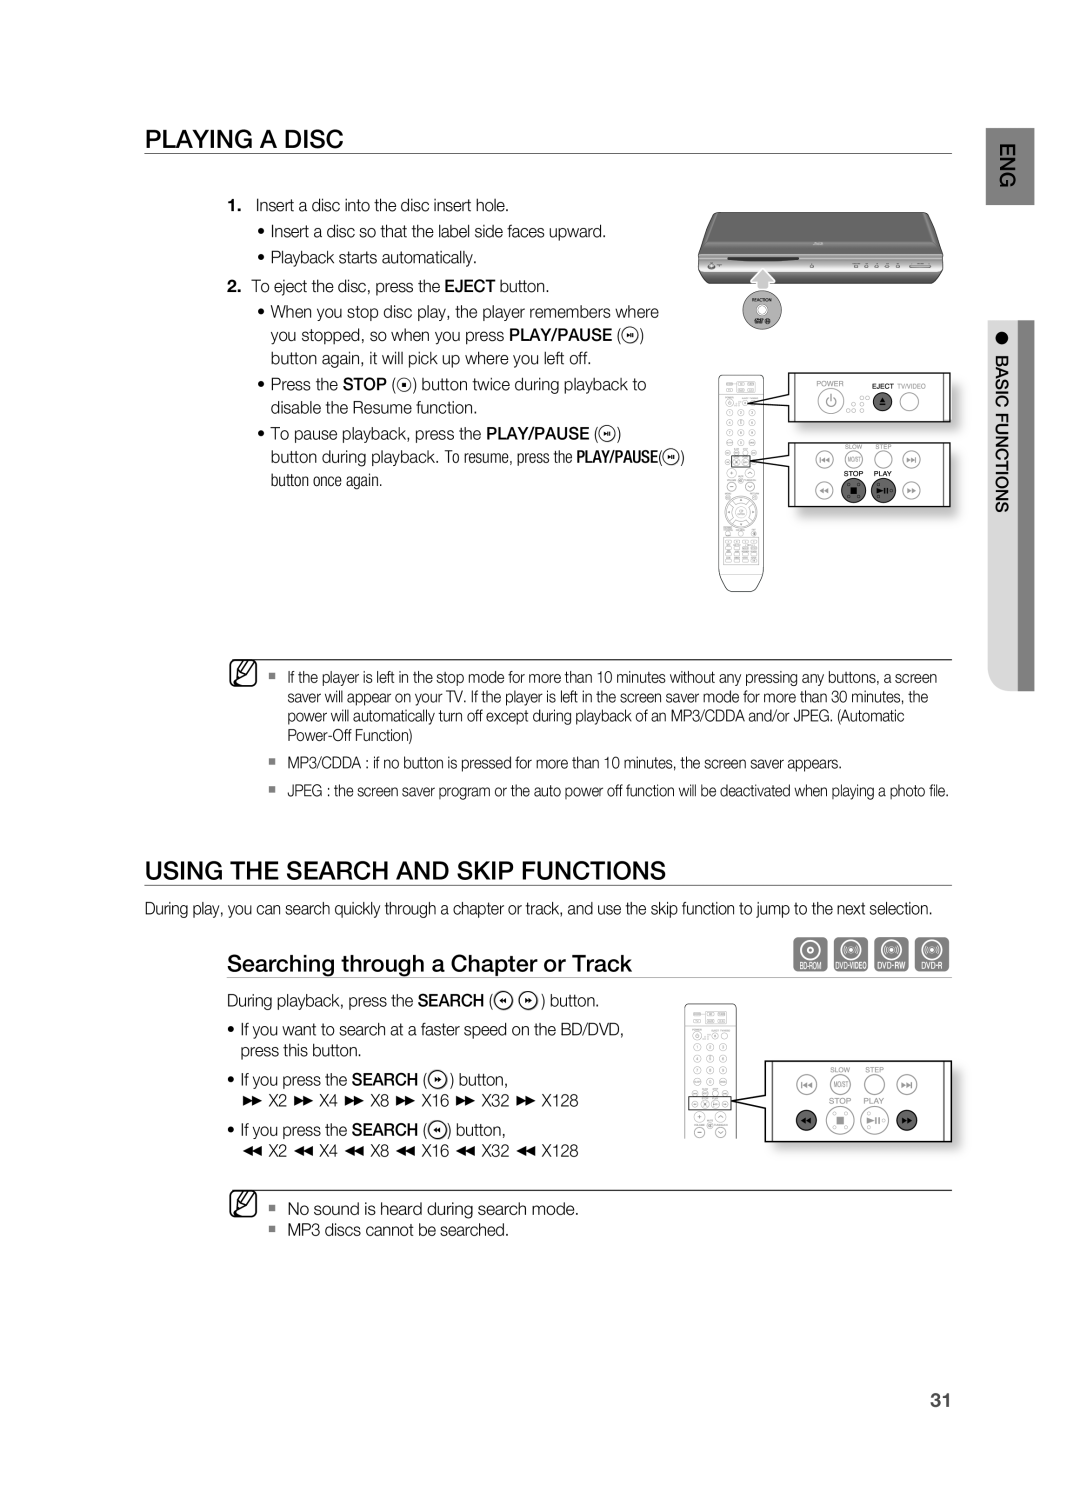 Samsung HT-BD2S manual hZCV, PLAYIng A DISC, USIng THE SEARCH AnD SKIP FUnCTIOnS, Searching through a Chapter or Track 